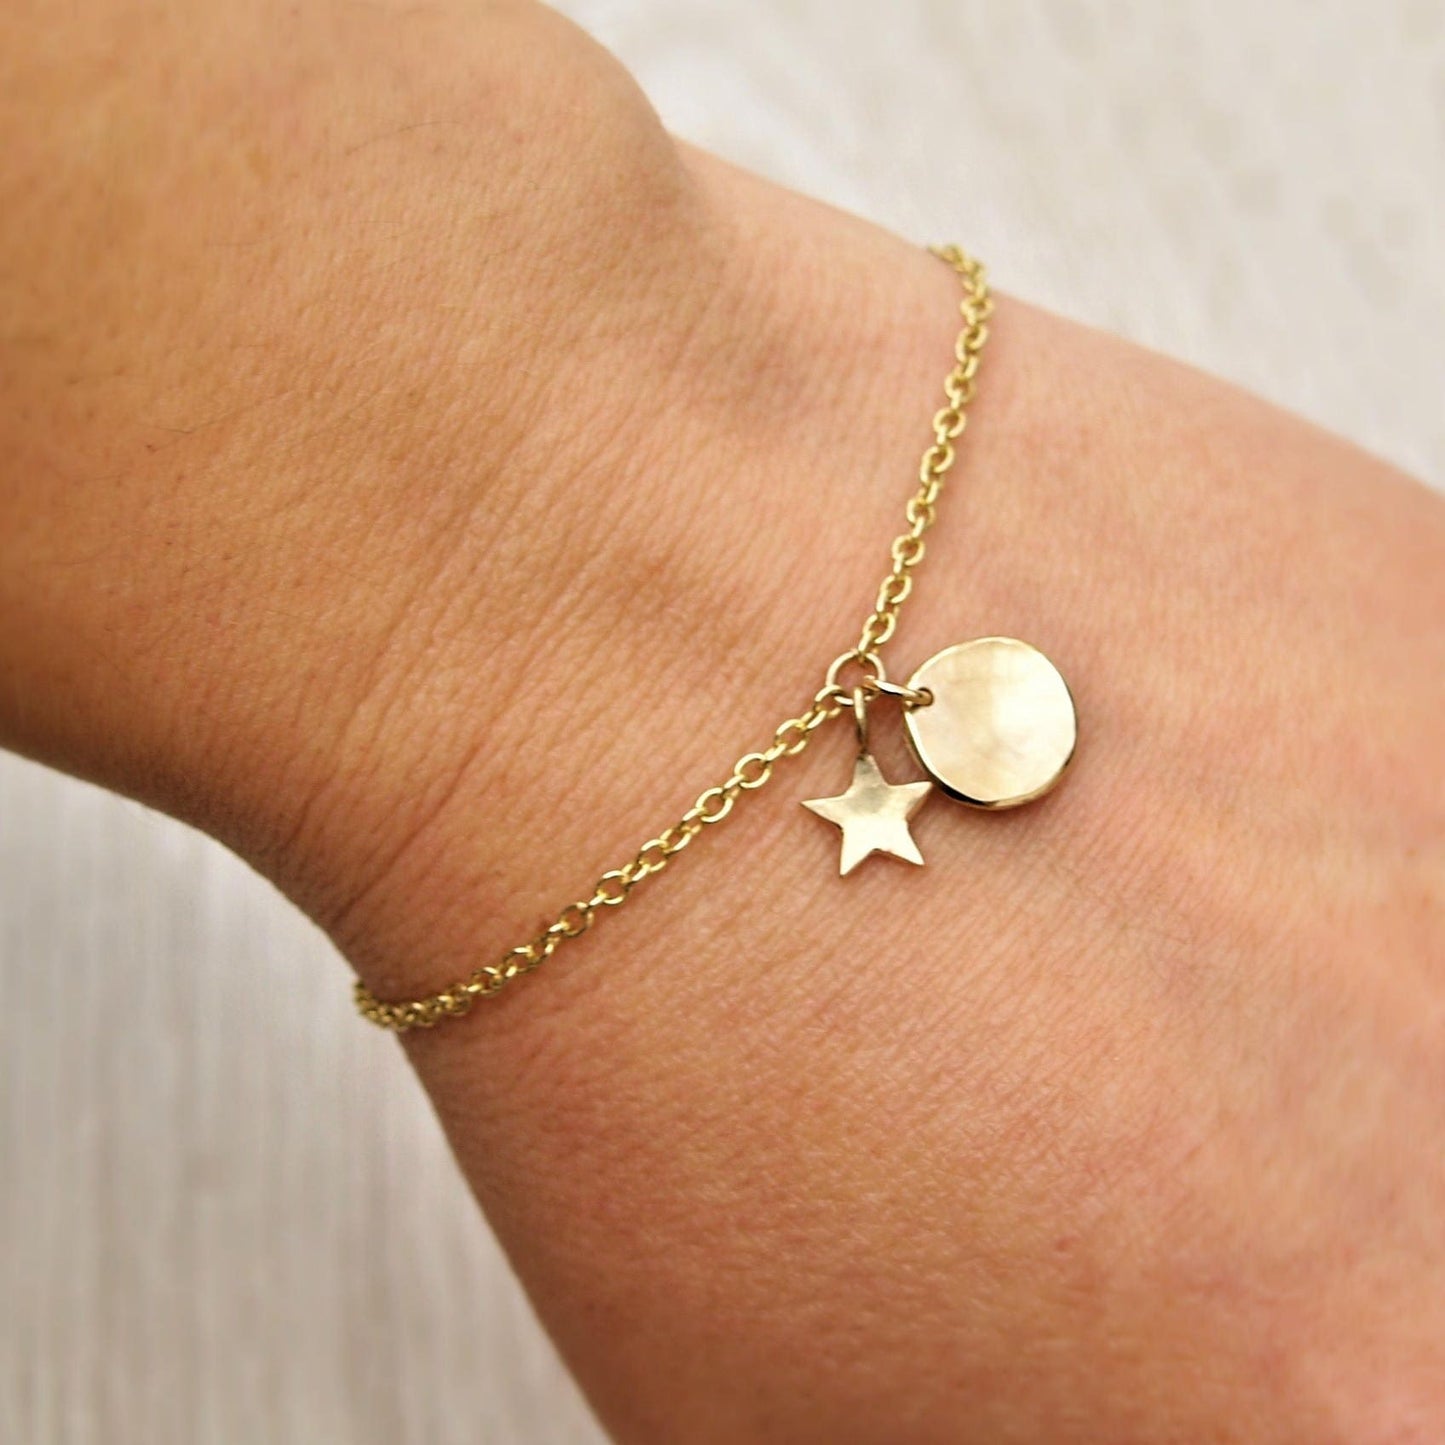 Handmade to order - 9ct yellow gold chain bracelet with a small size petal and star charm